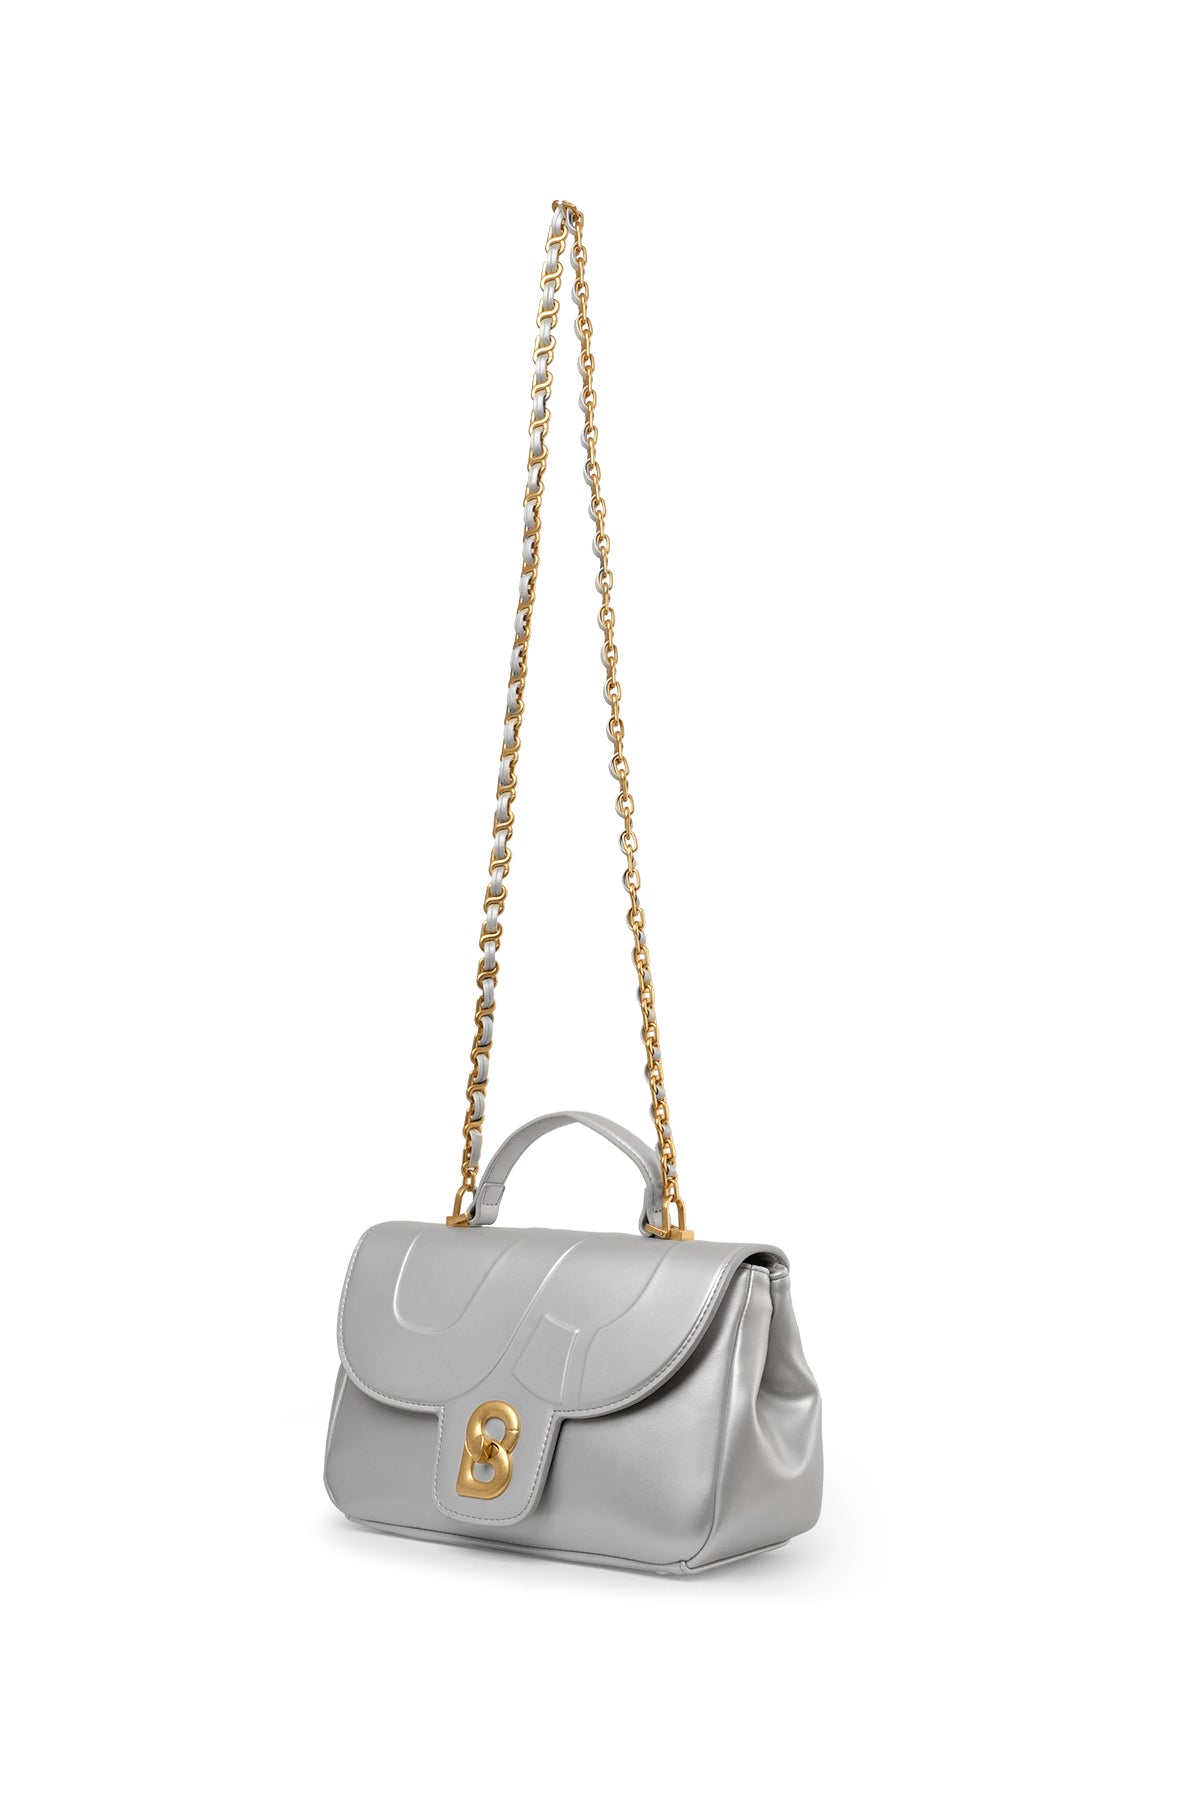 Alma flap Bag Beige by Buttonscarves